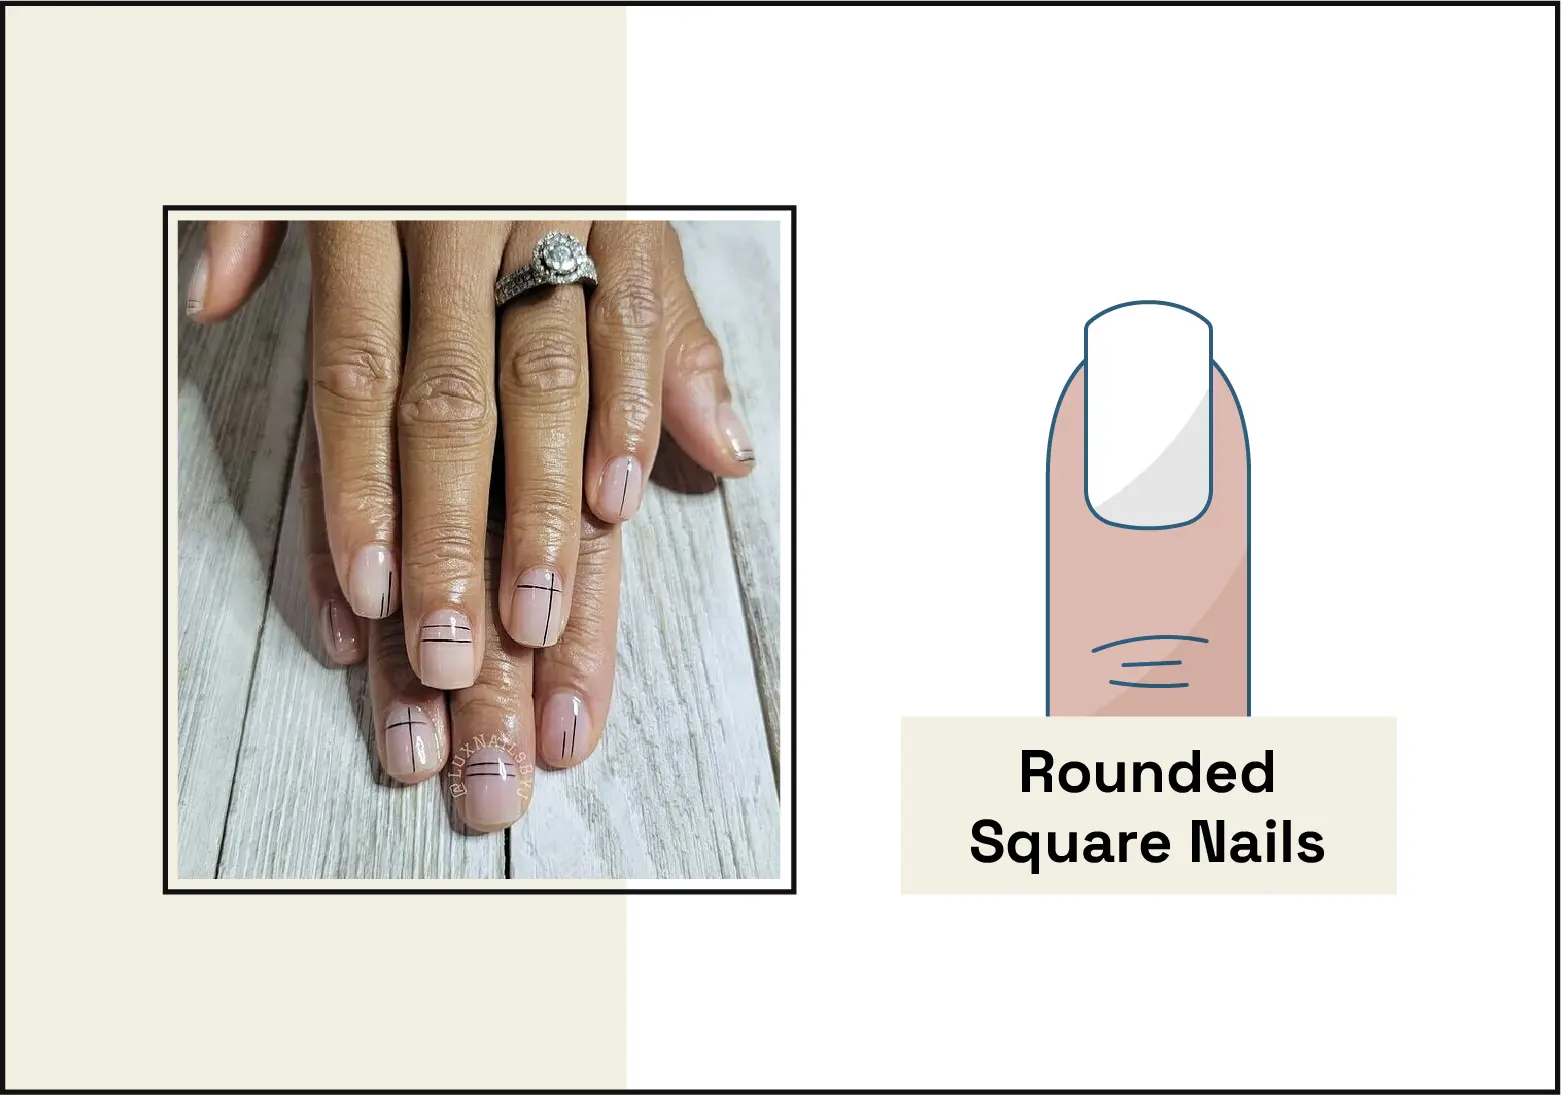 photo of manicure with nude rounded square nails with black detail work on the left, illustration of the rounded square nail shape on the right